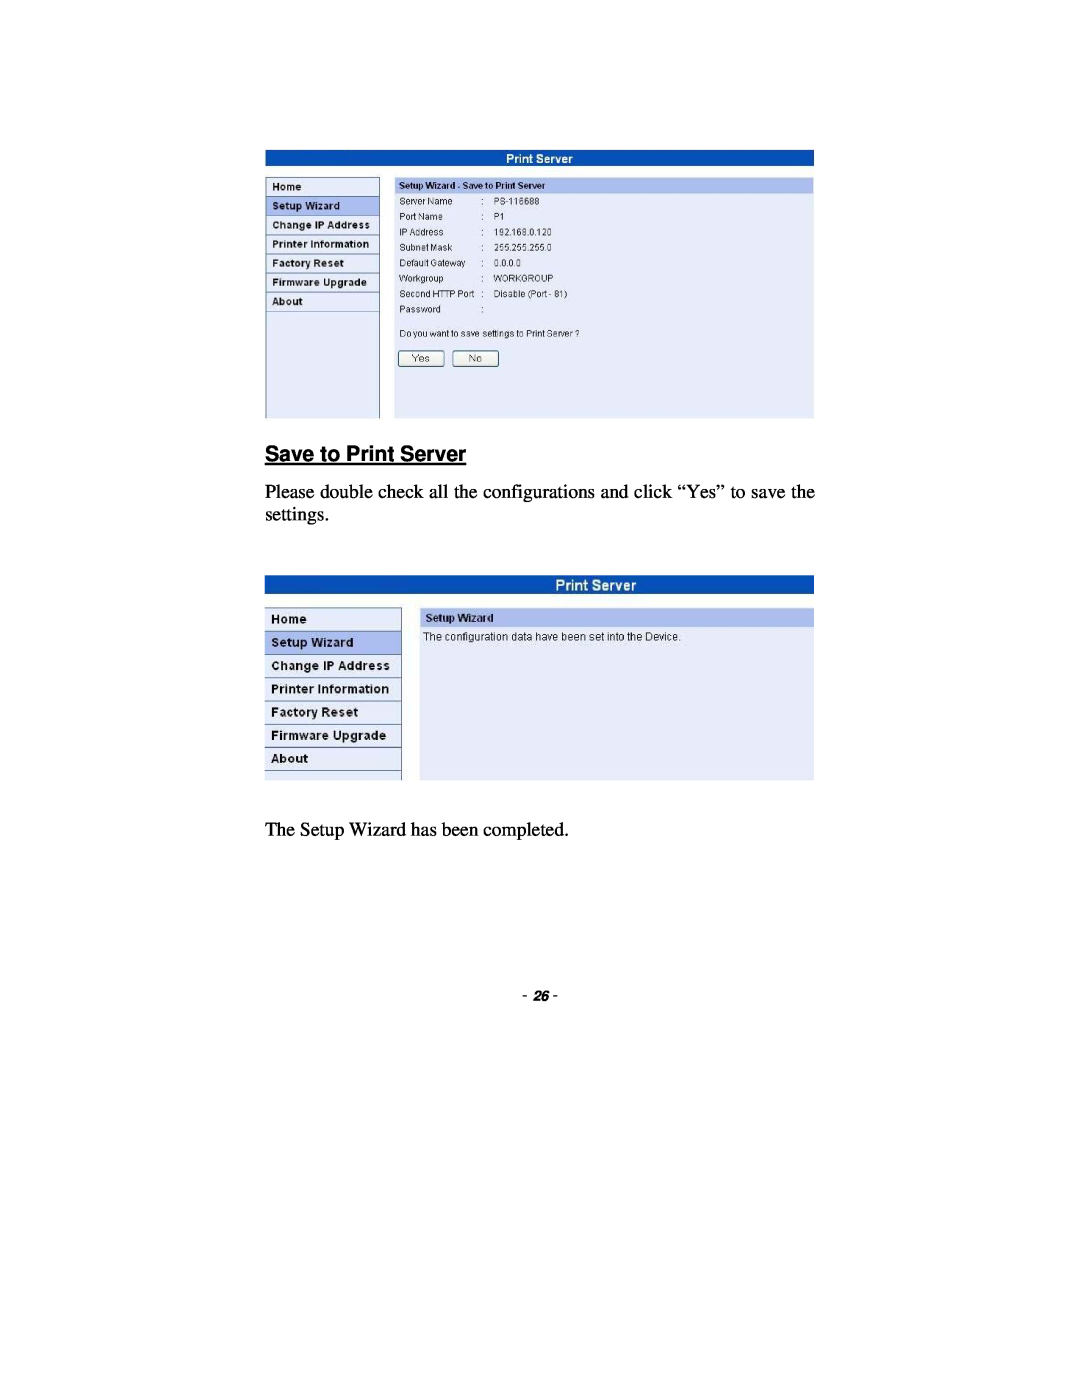 TRENDnet TE100-P1P manual Save to Print Server, The Setup Wizard has been completed 